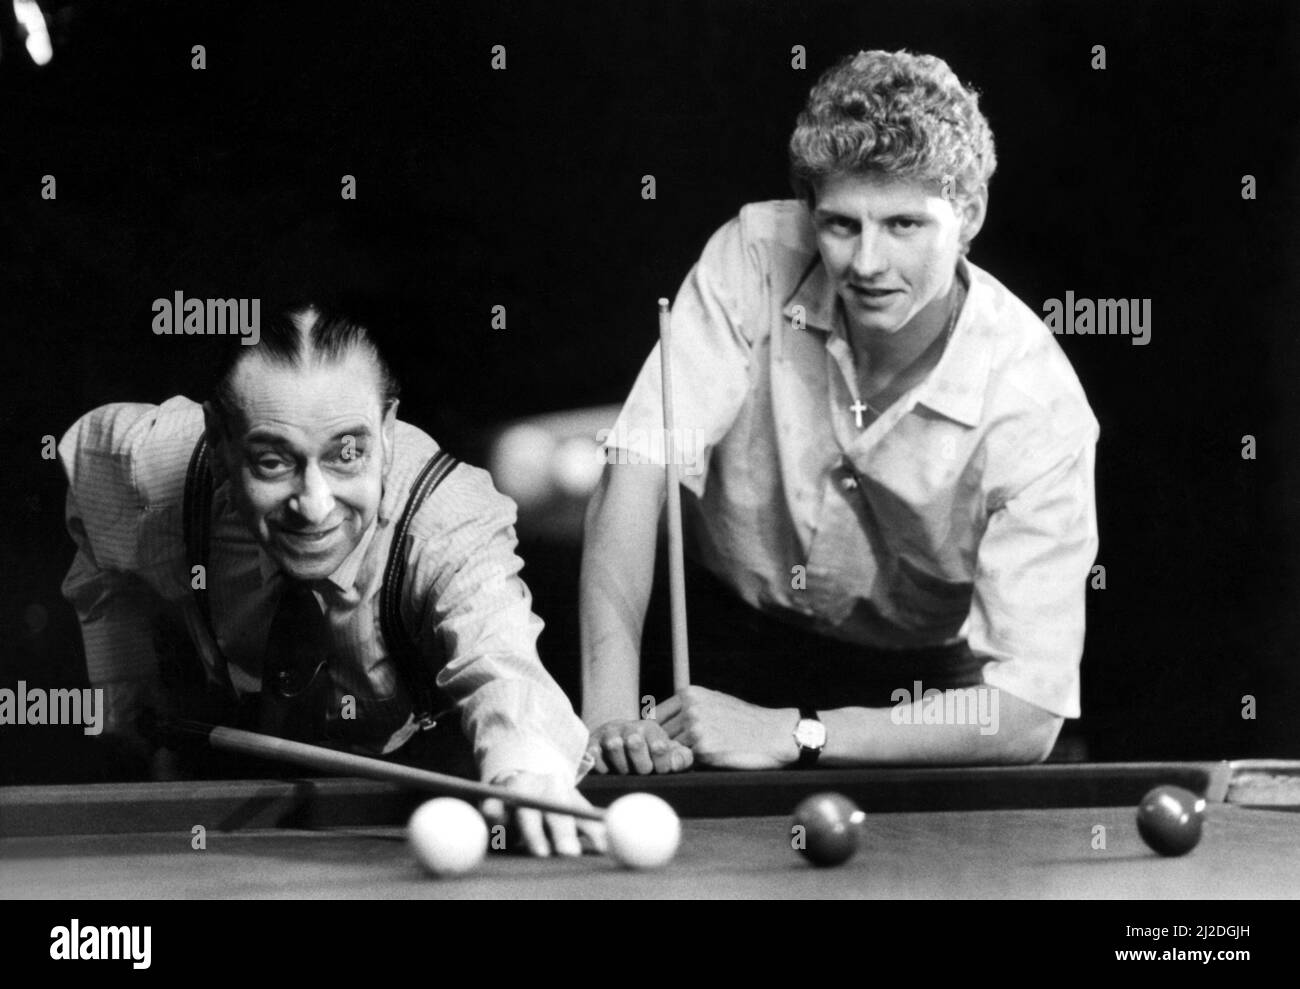 Athlete Steve Cram Steve Cram with comic Bobby Thompson who are gearing up for a charity snooker match against Jimmy White and Silvino Francisco in aid of the Variety Club of Great Britain 17 May 1985 Stock Photo